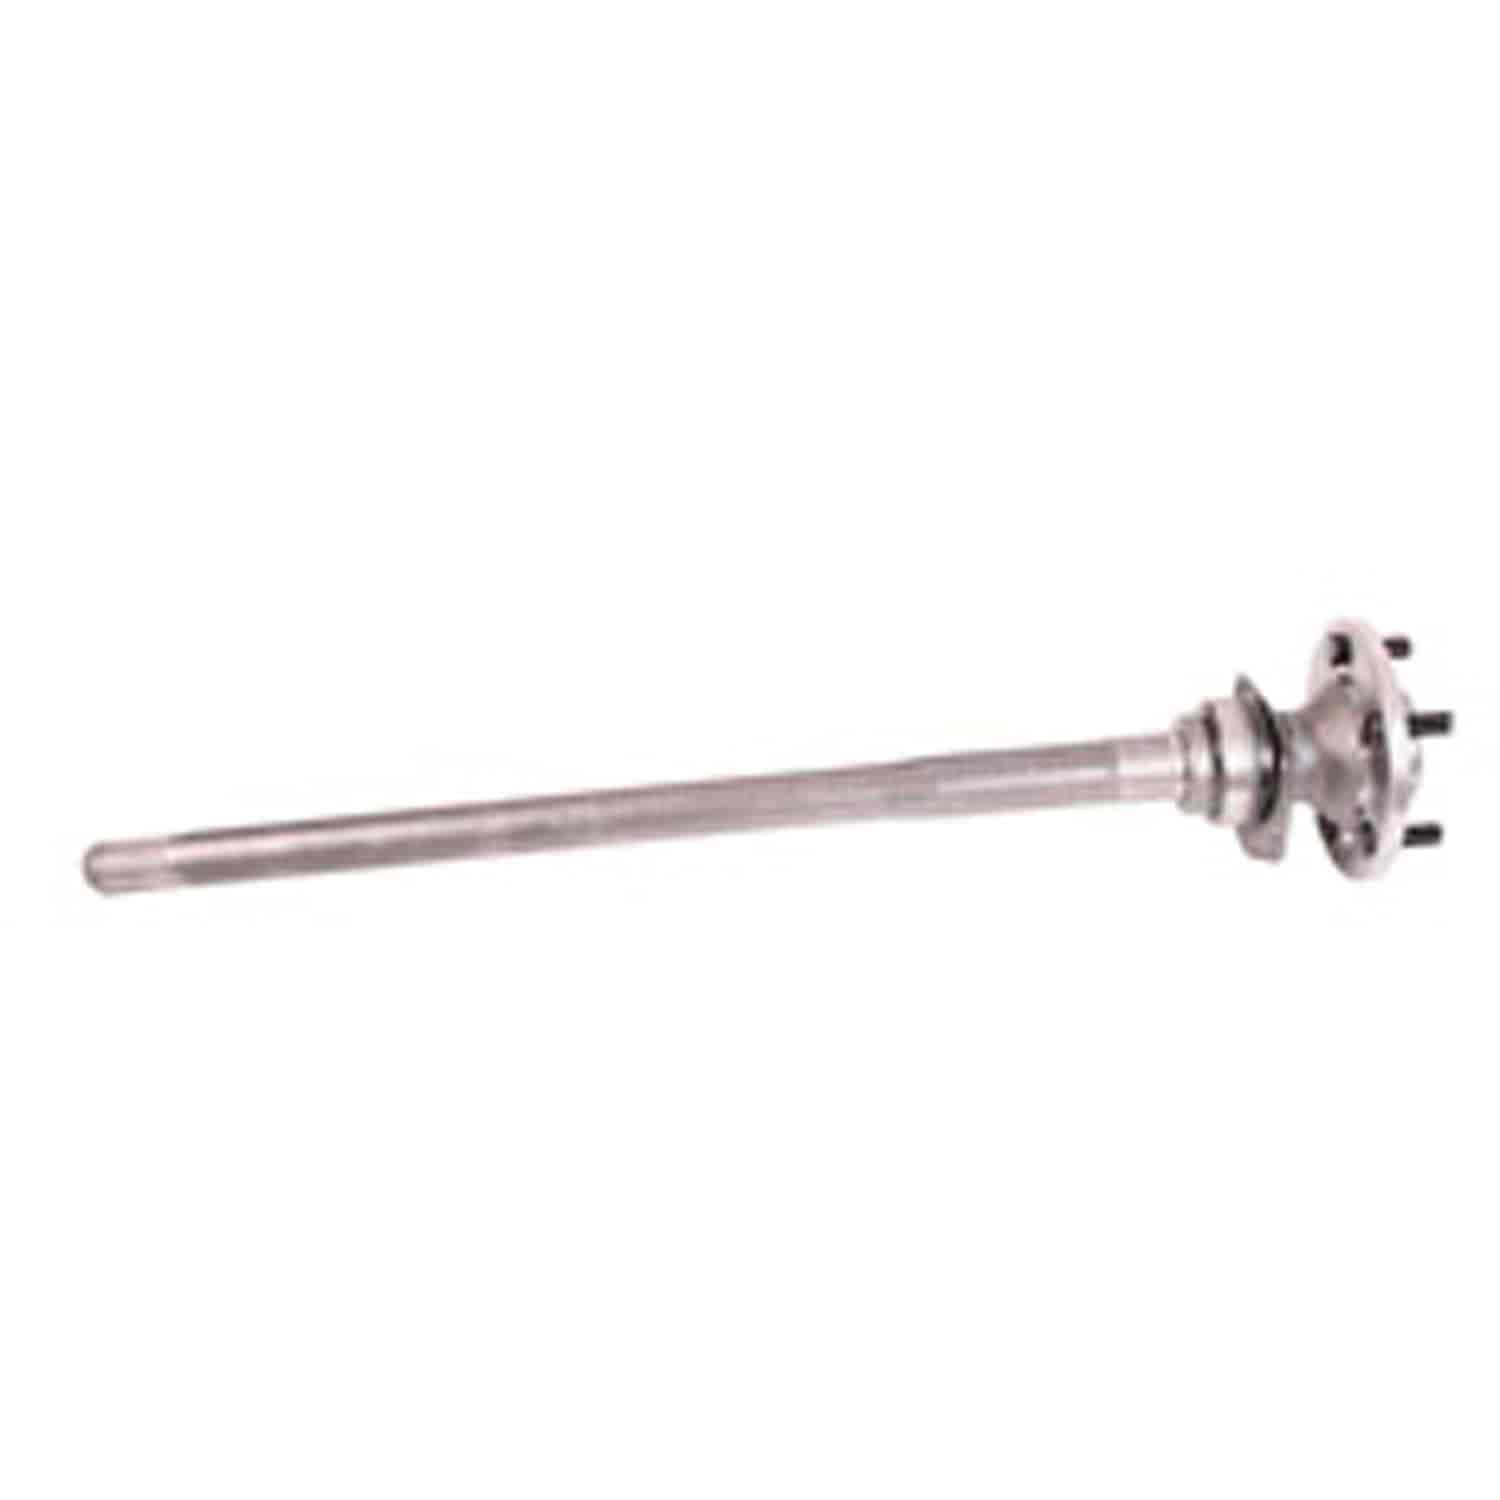 This rear axle shaft for Dana 44 fits the left side of 03-06 Jeep Wrangler TJ with 3.07 to 3.73 ring